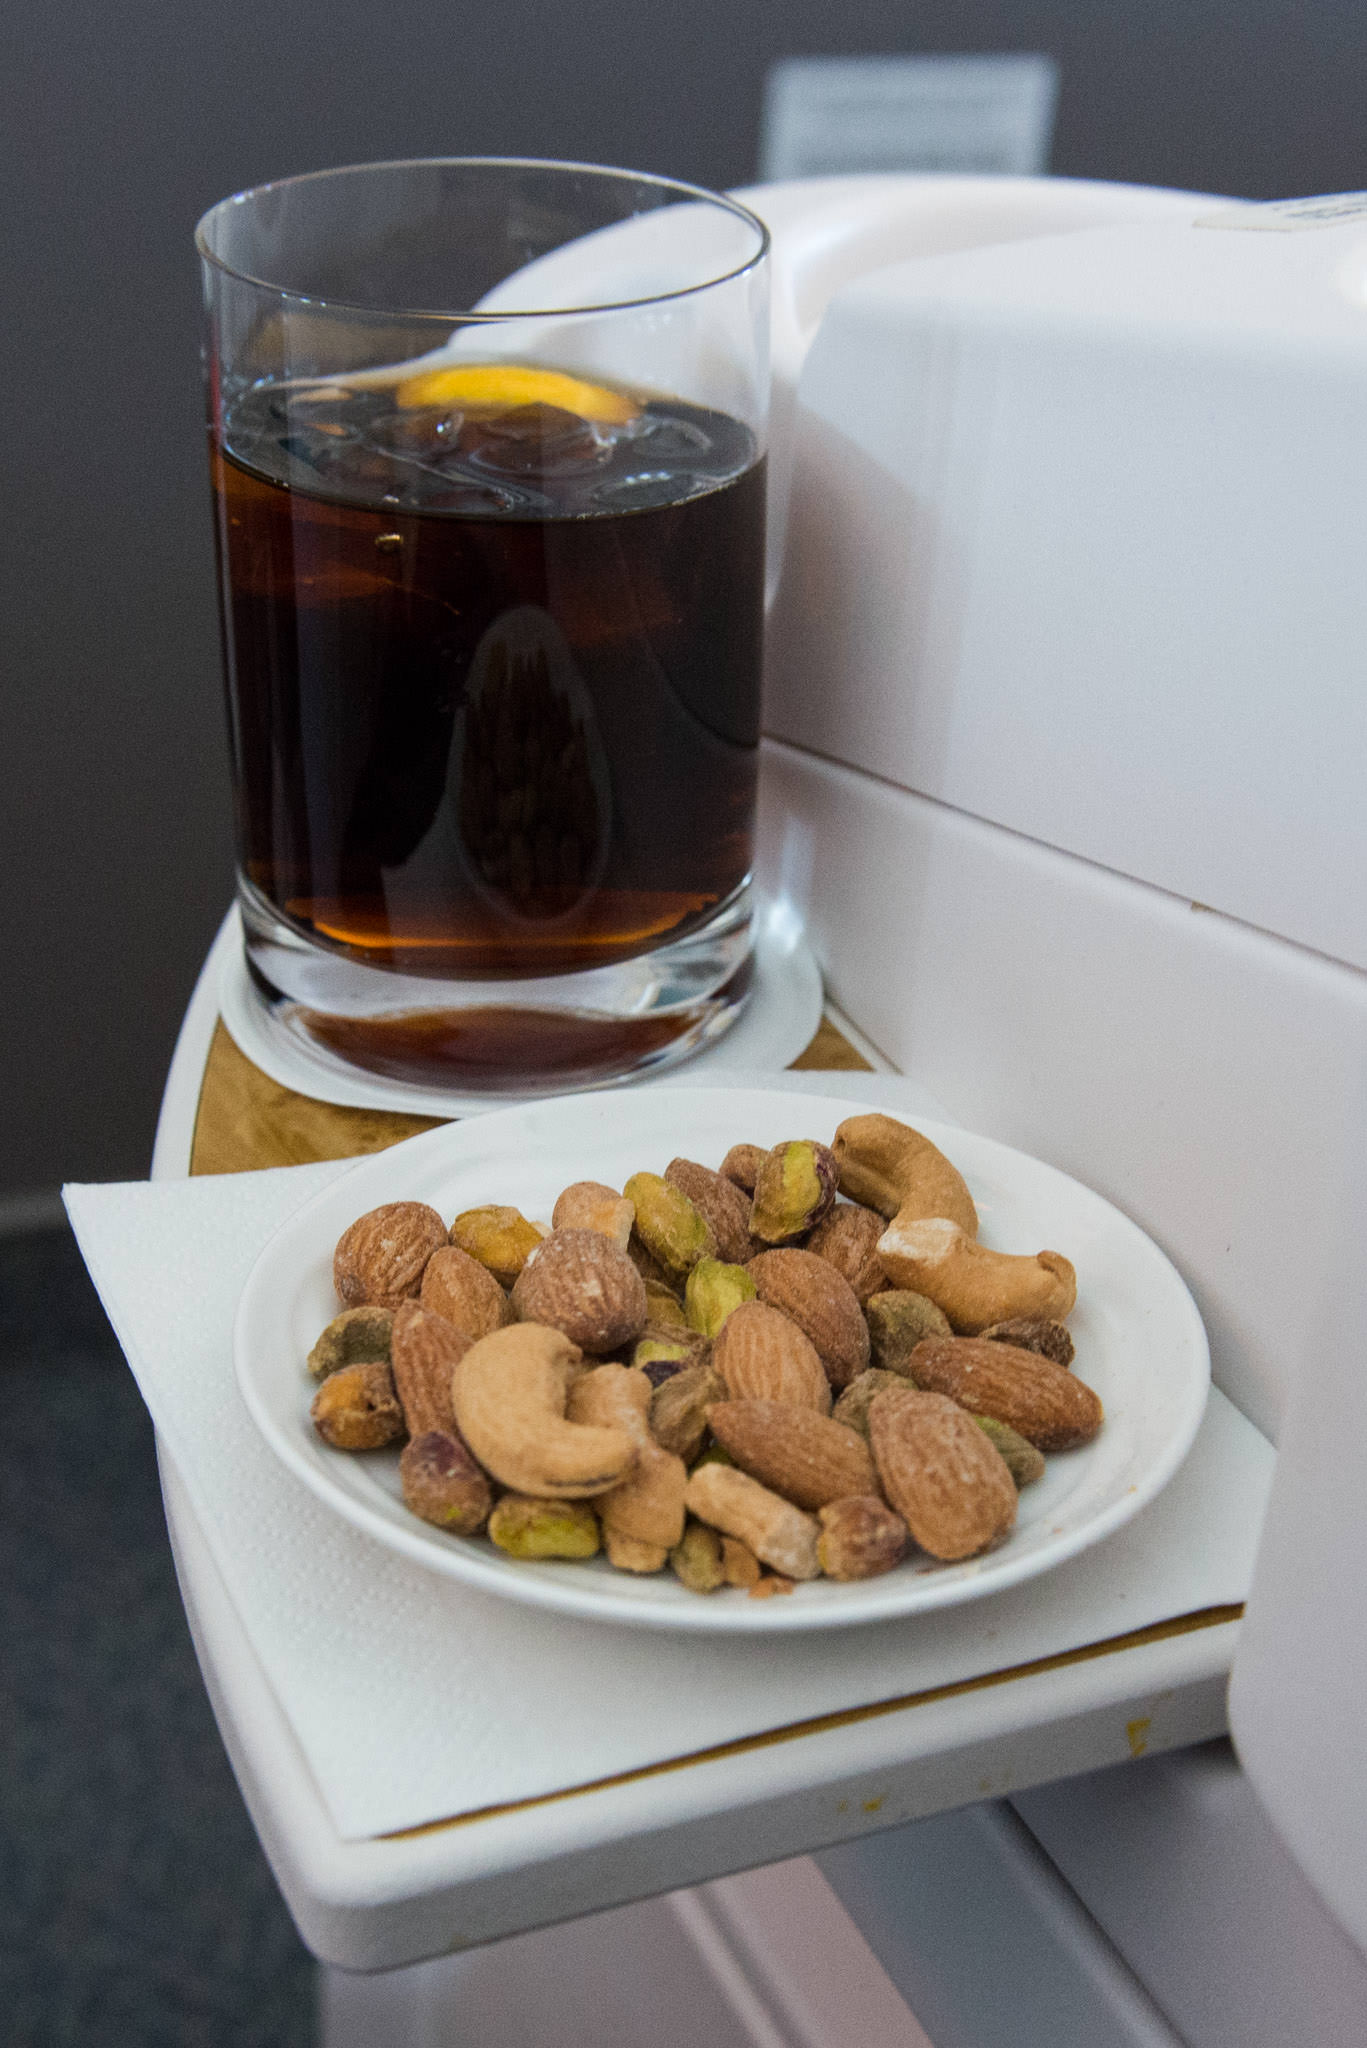 A drink and nuts as soon as I'm seated